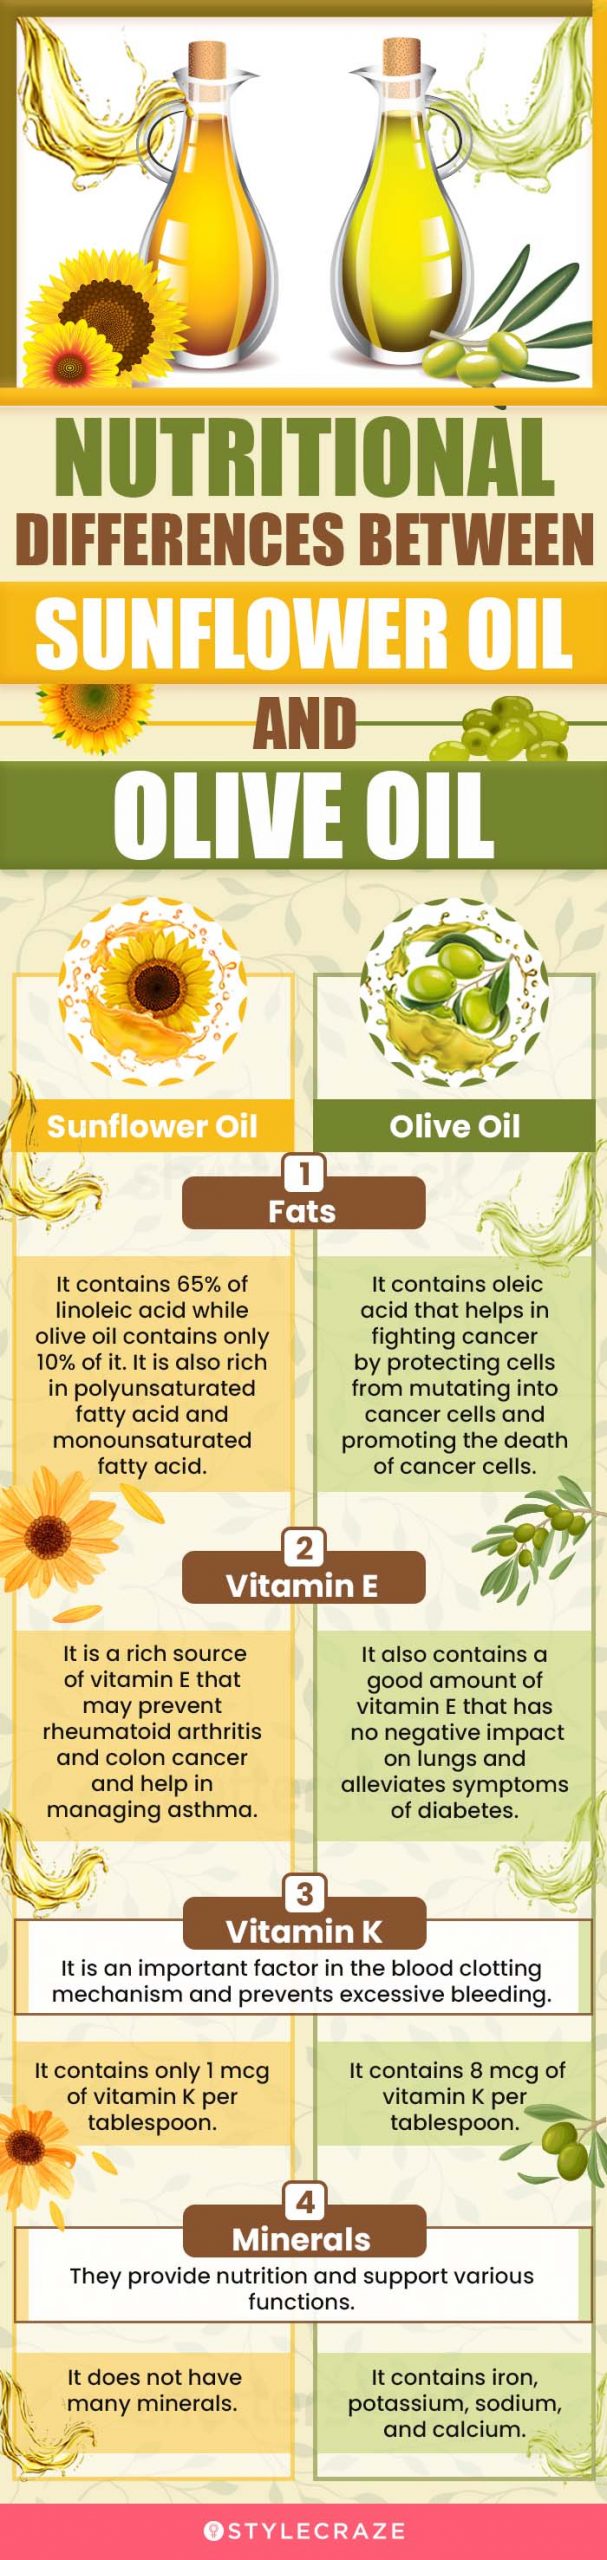 nutritional differences between sunflower oil and olive oil (infographic)